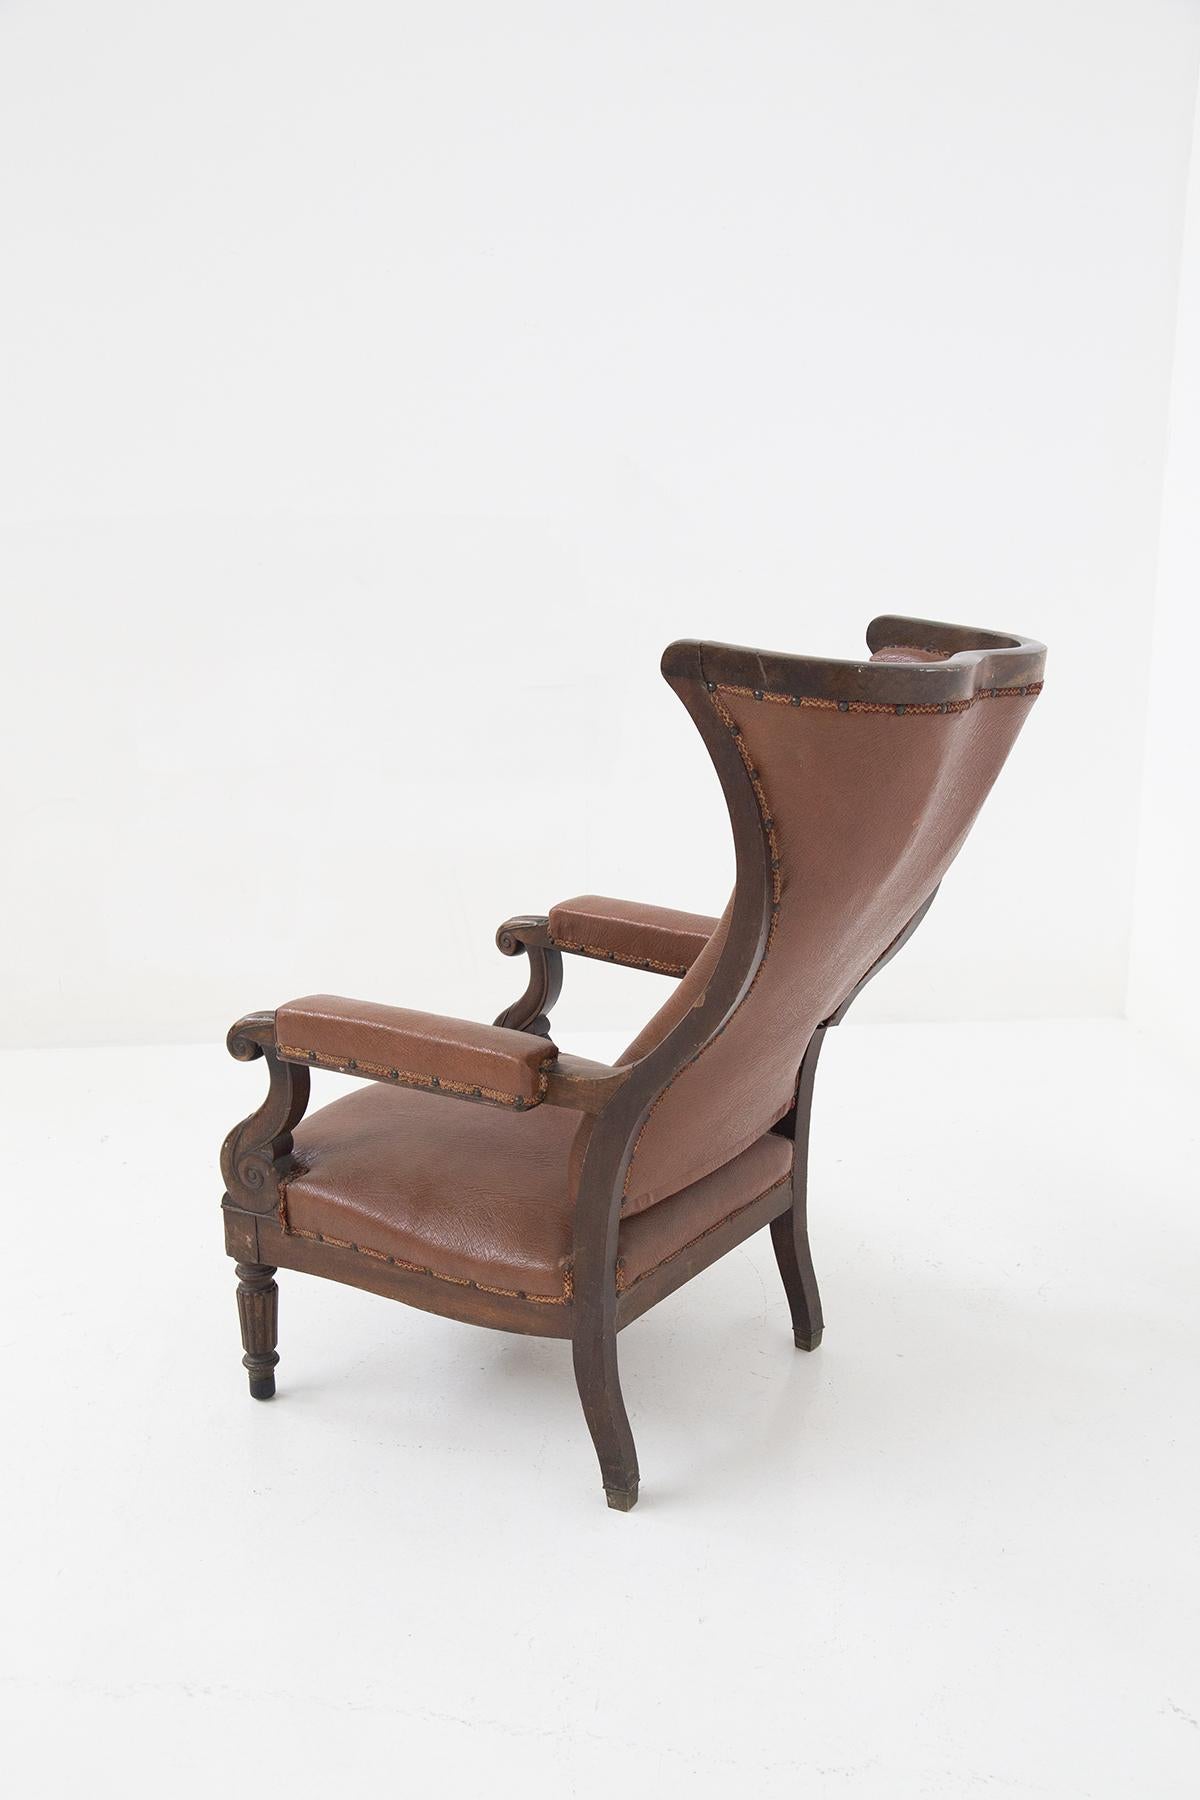 Early 19th Century French Antique Armchair in Original Wood and Leather For Sale